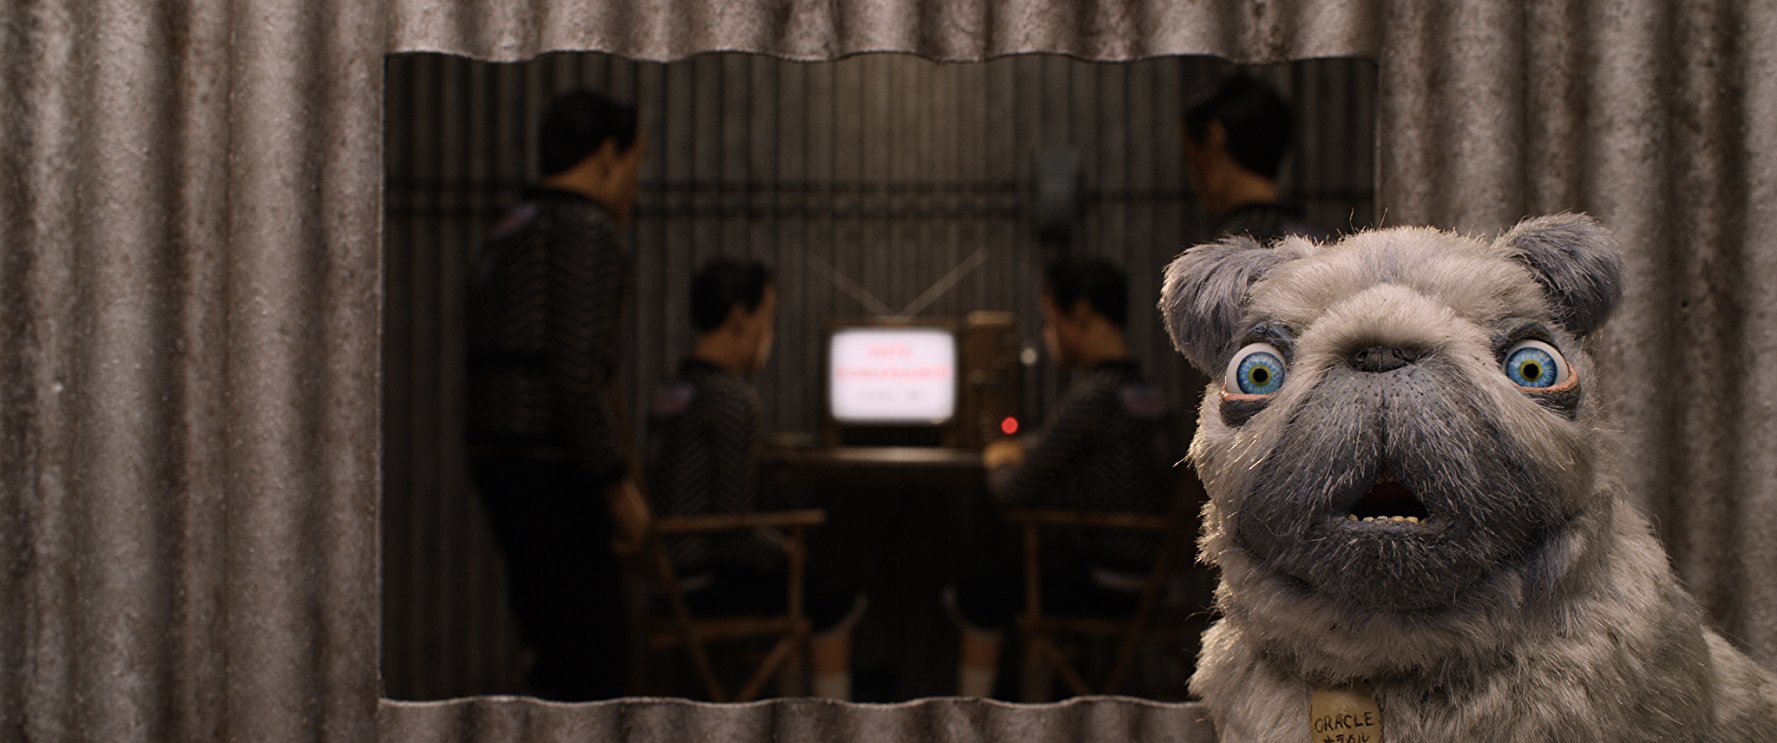 Isle Of Dogs (2018) Review 2